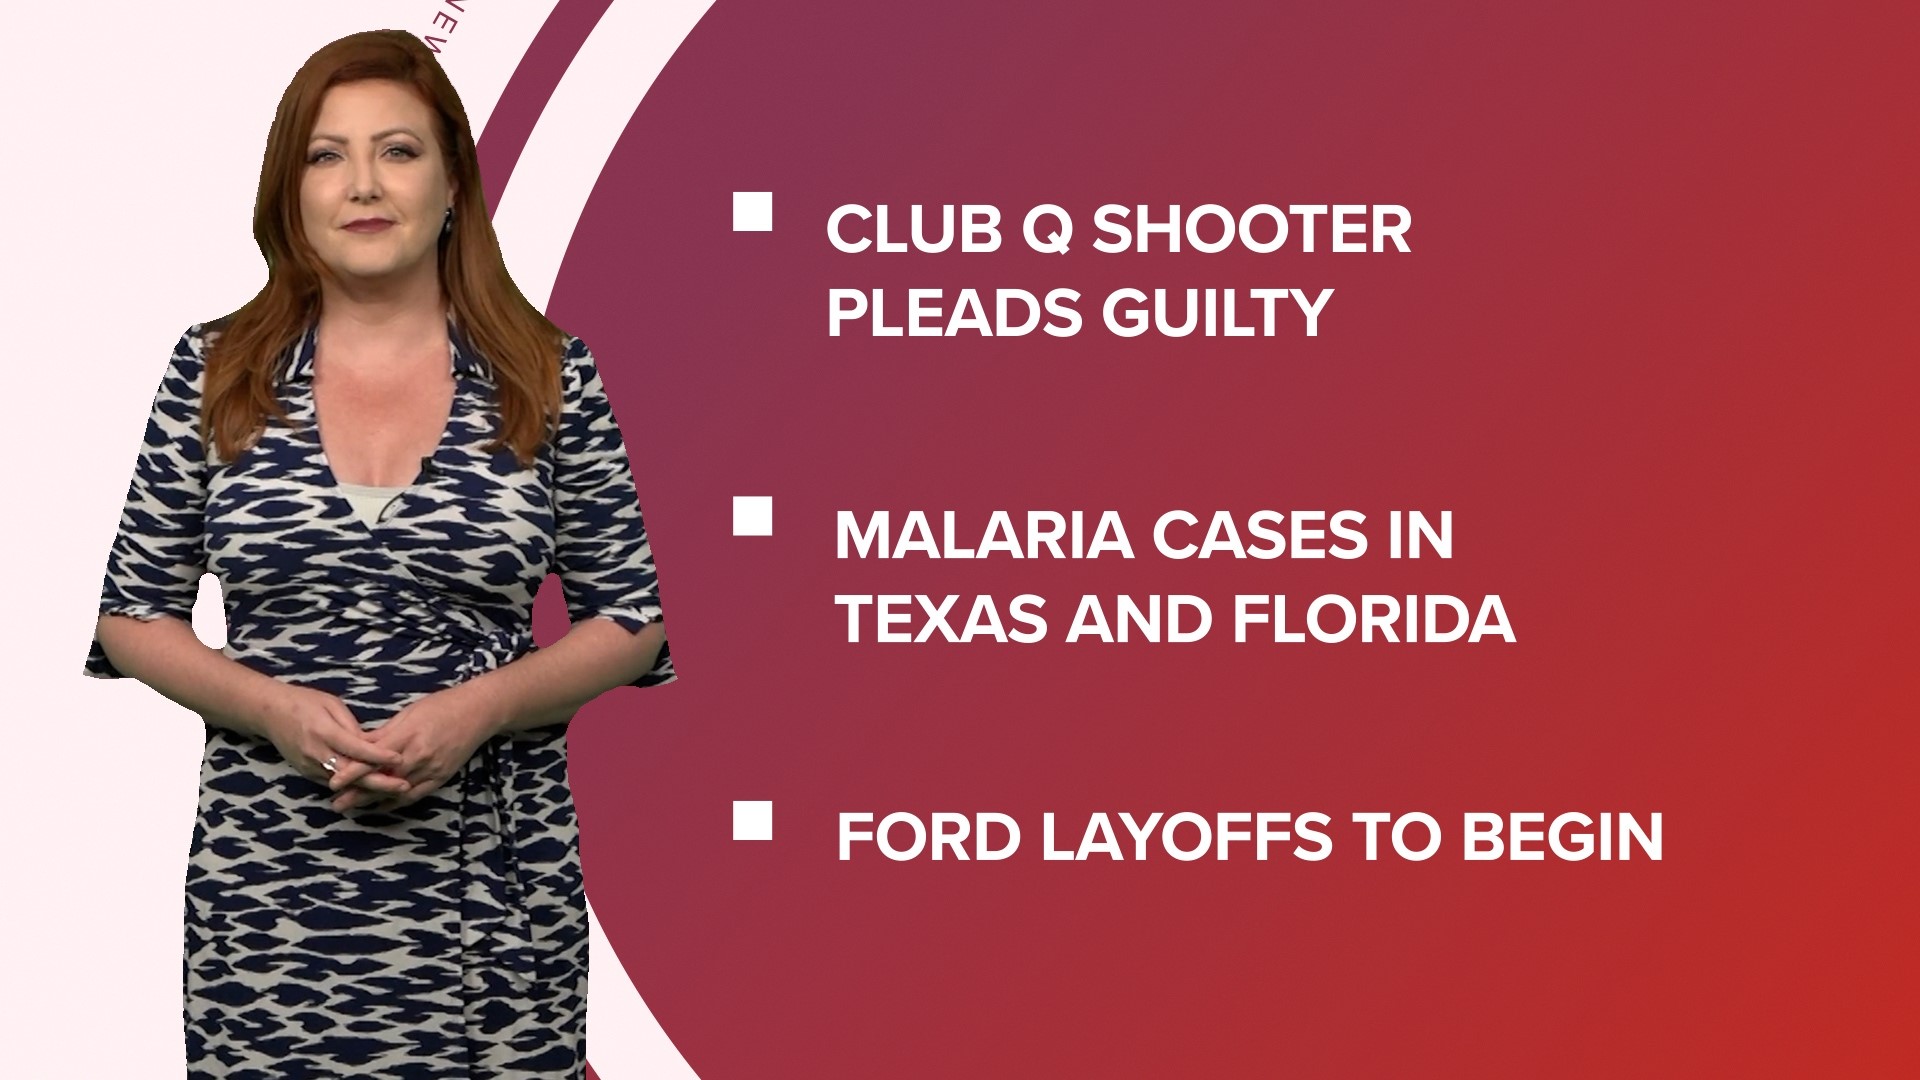 A look at what is happening in the news from the Club Q shooter pleading guilty to Ford layoffs and malaria cases in the U.S.